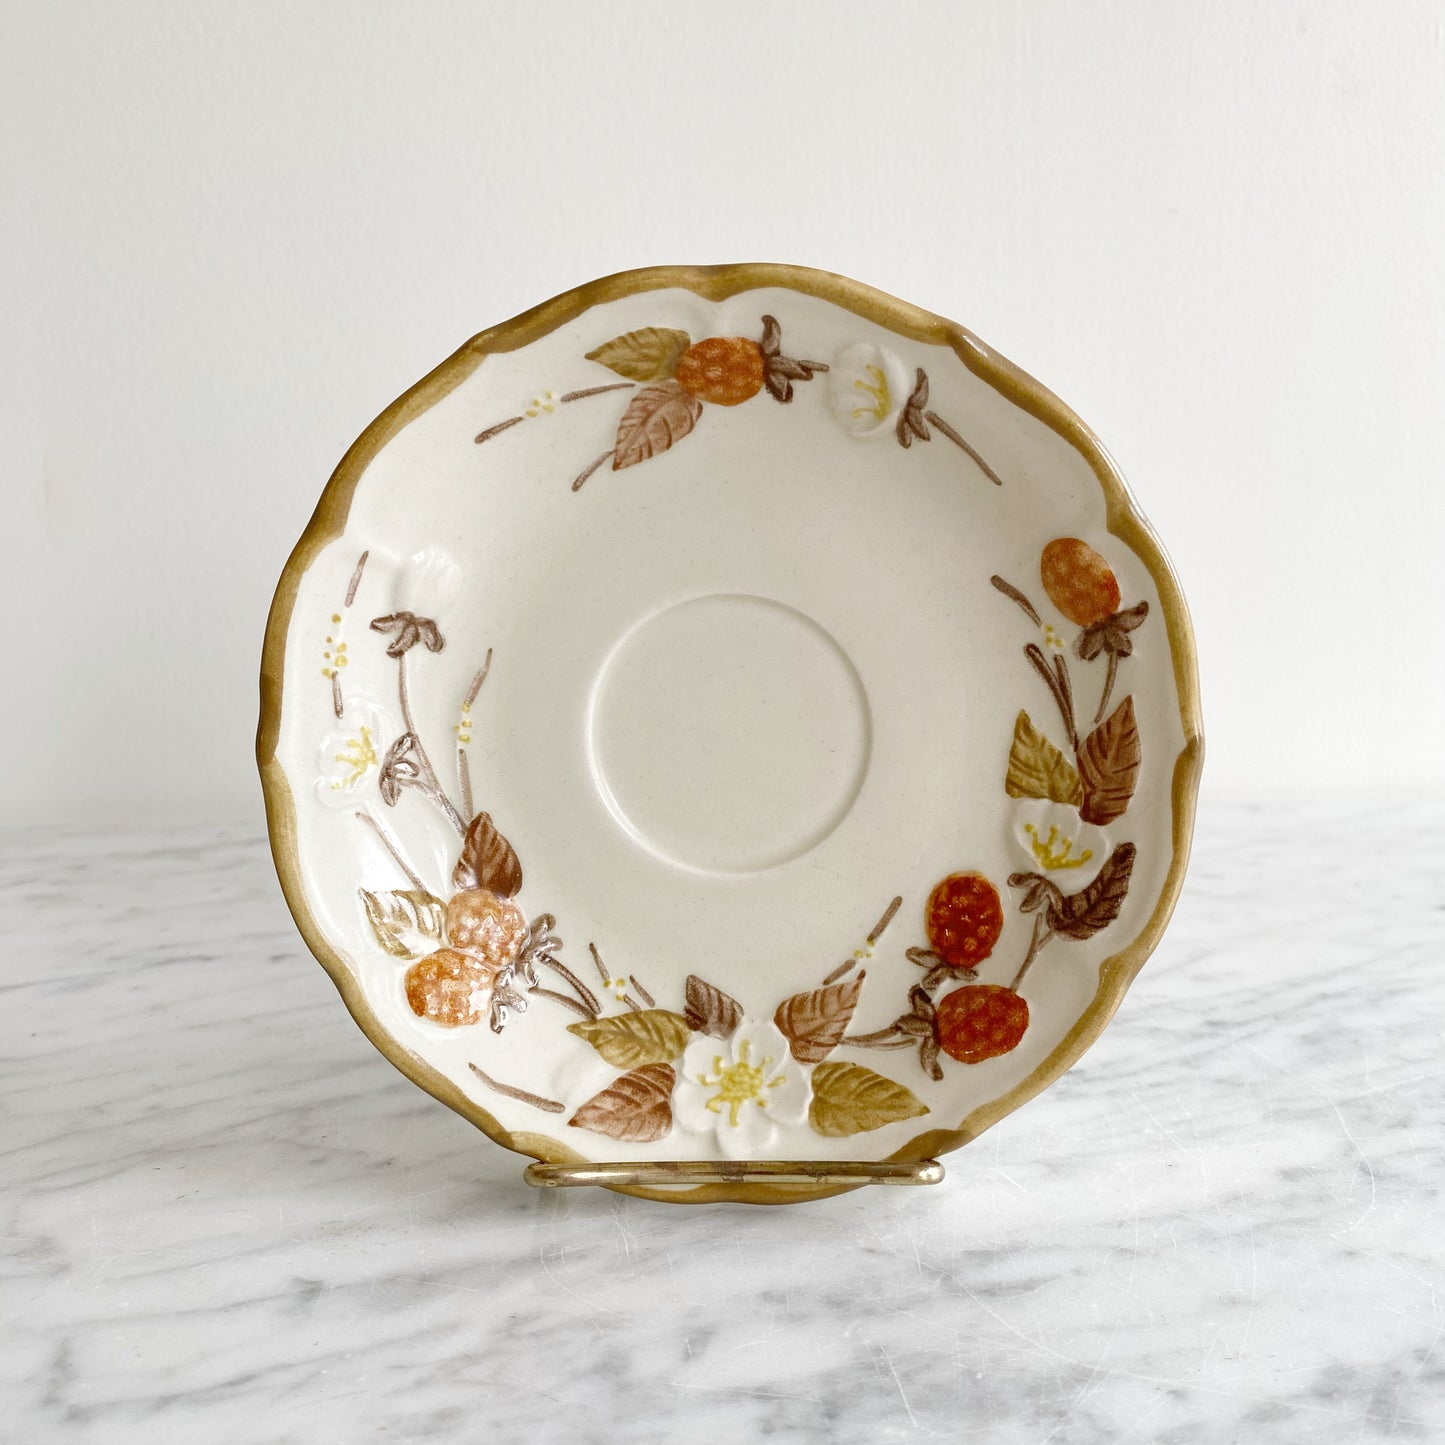 Vintage Ceramic Saucer with Raspberry Blossoms